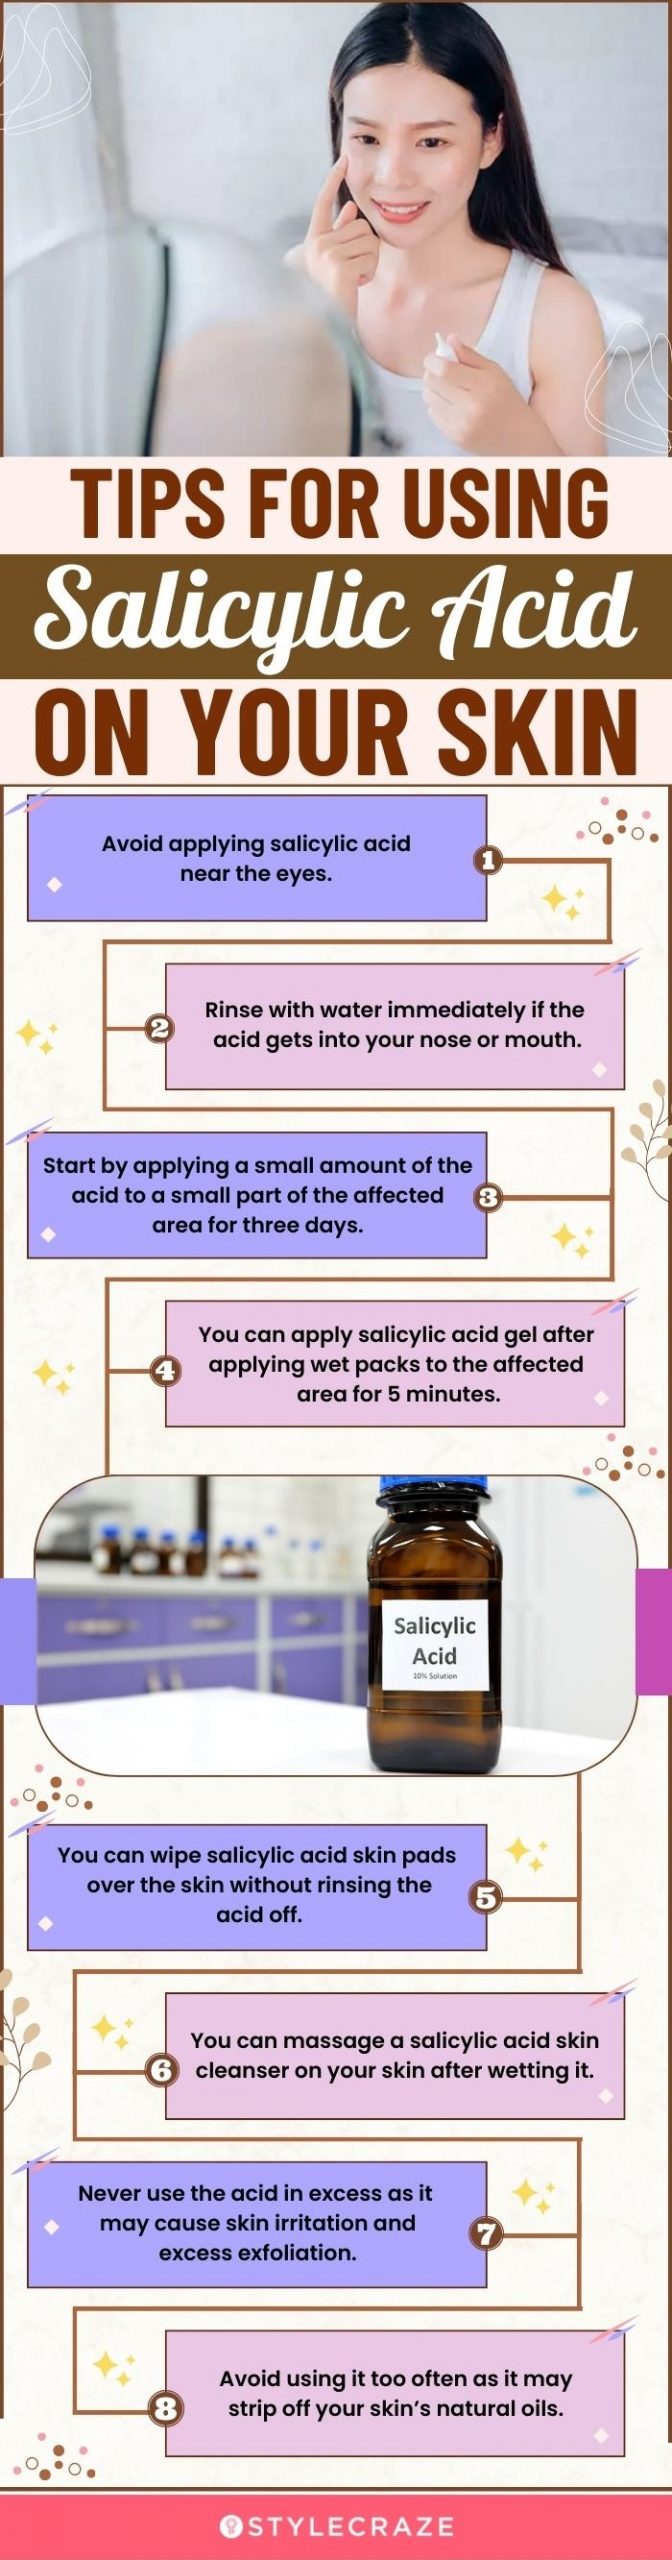 tips for using salicylic acid on your skin (infographic)